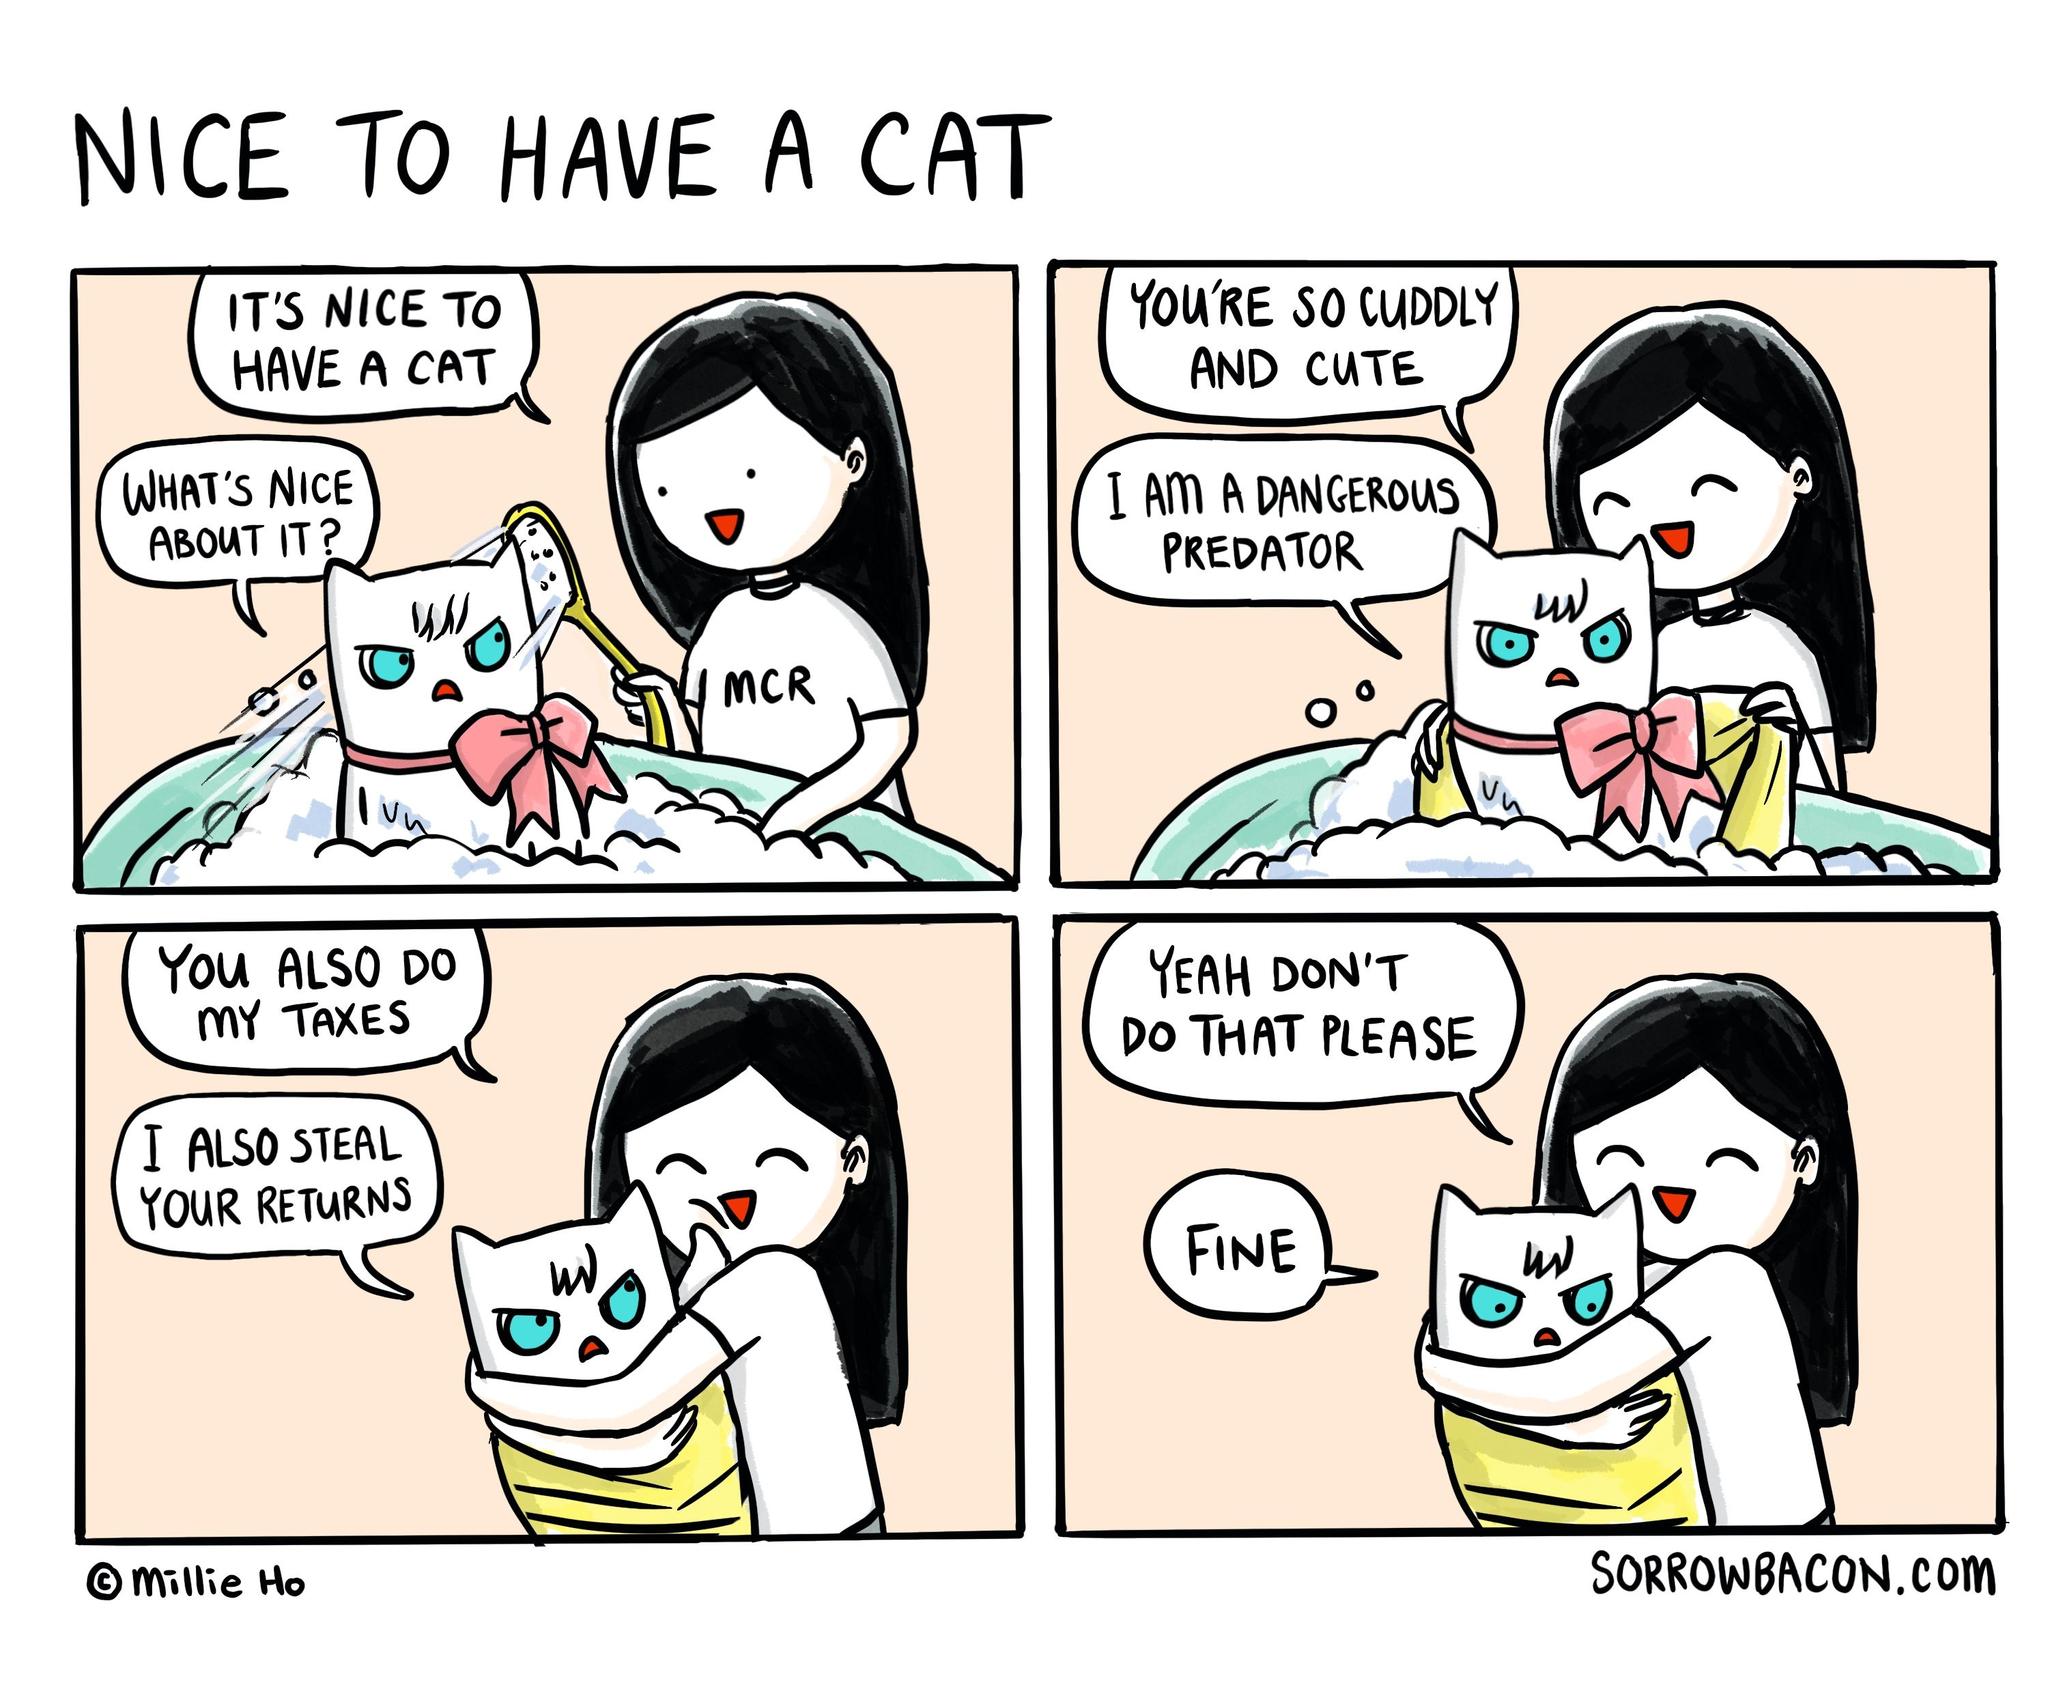 Nice to Have a Cat sorrowbacon comic